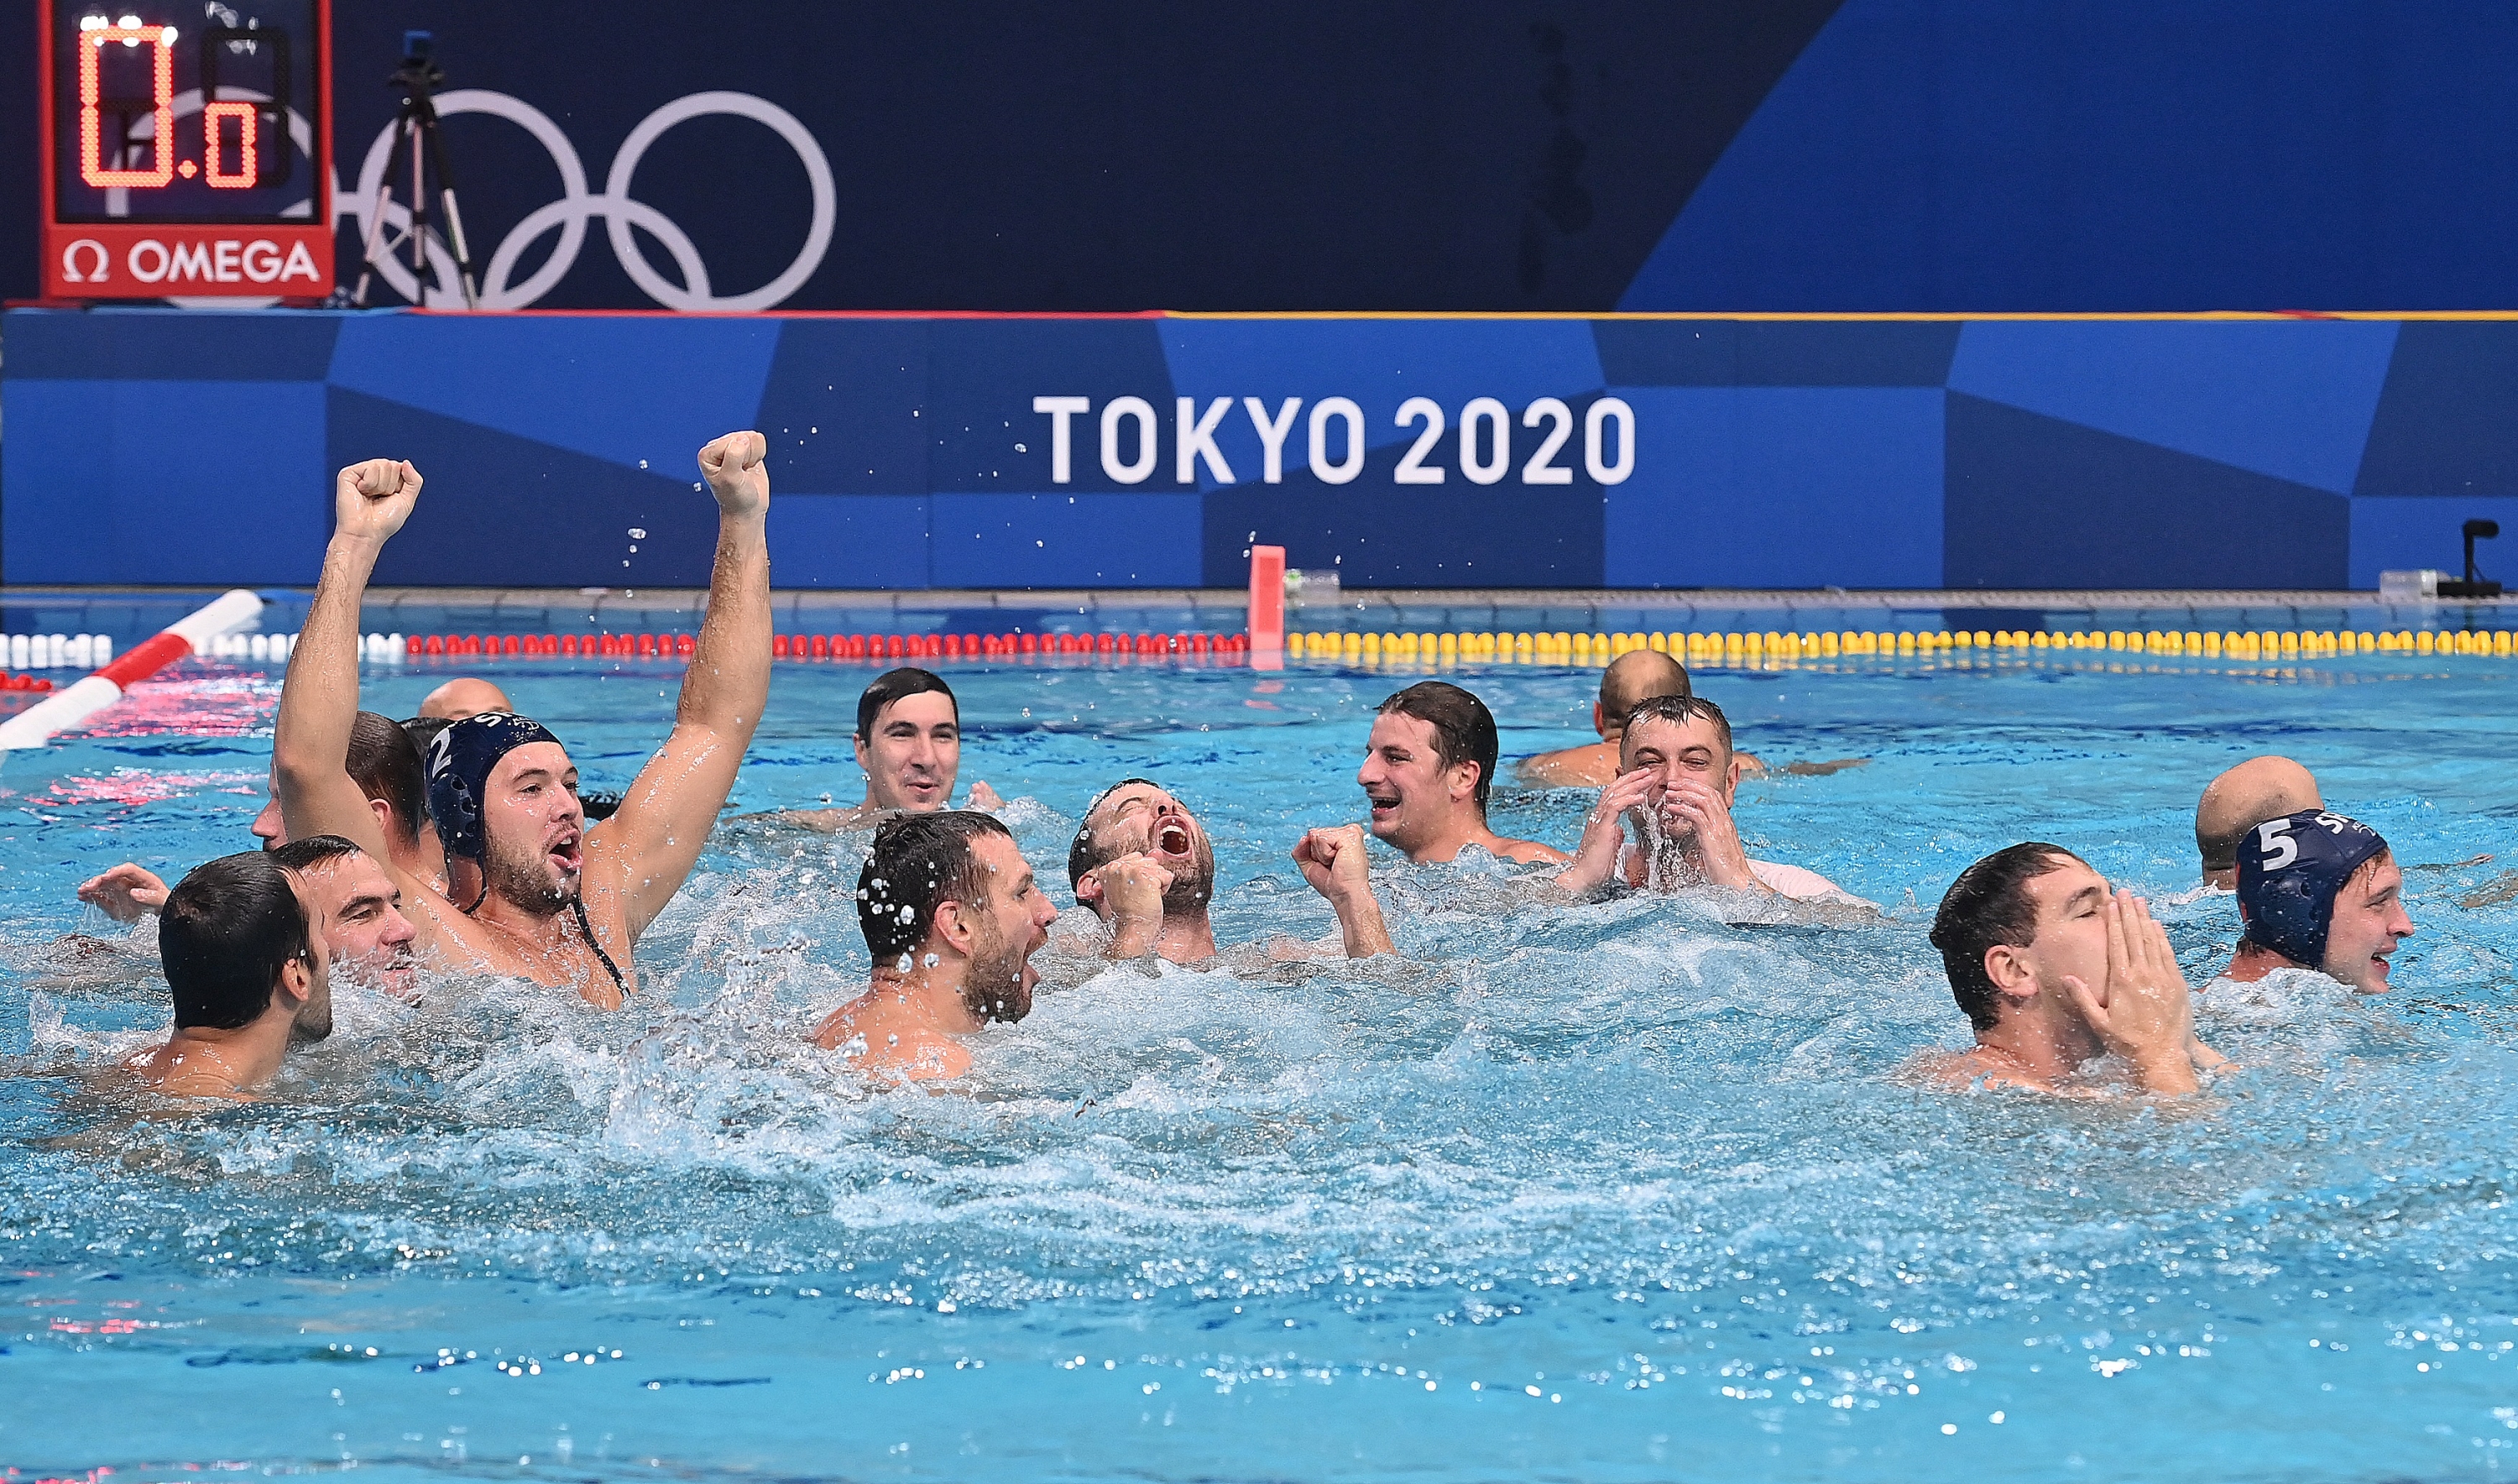 Gold medallists Serbia celebrate in the pool after winning the Tokyo 2020 Olympic Games men's water polo gold medal match between Greece and Serbia at the Tatsumi Water Polo Centre in Tokyo on August 8, 2021. (Photo by Angela WEISS / AFP)